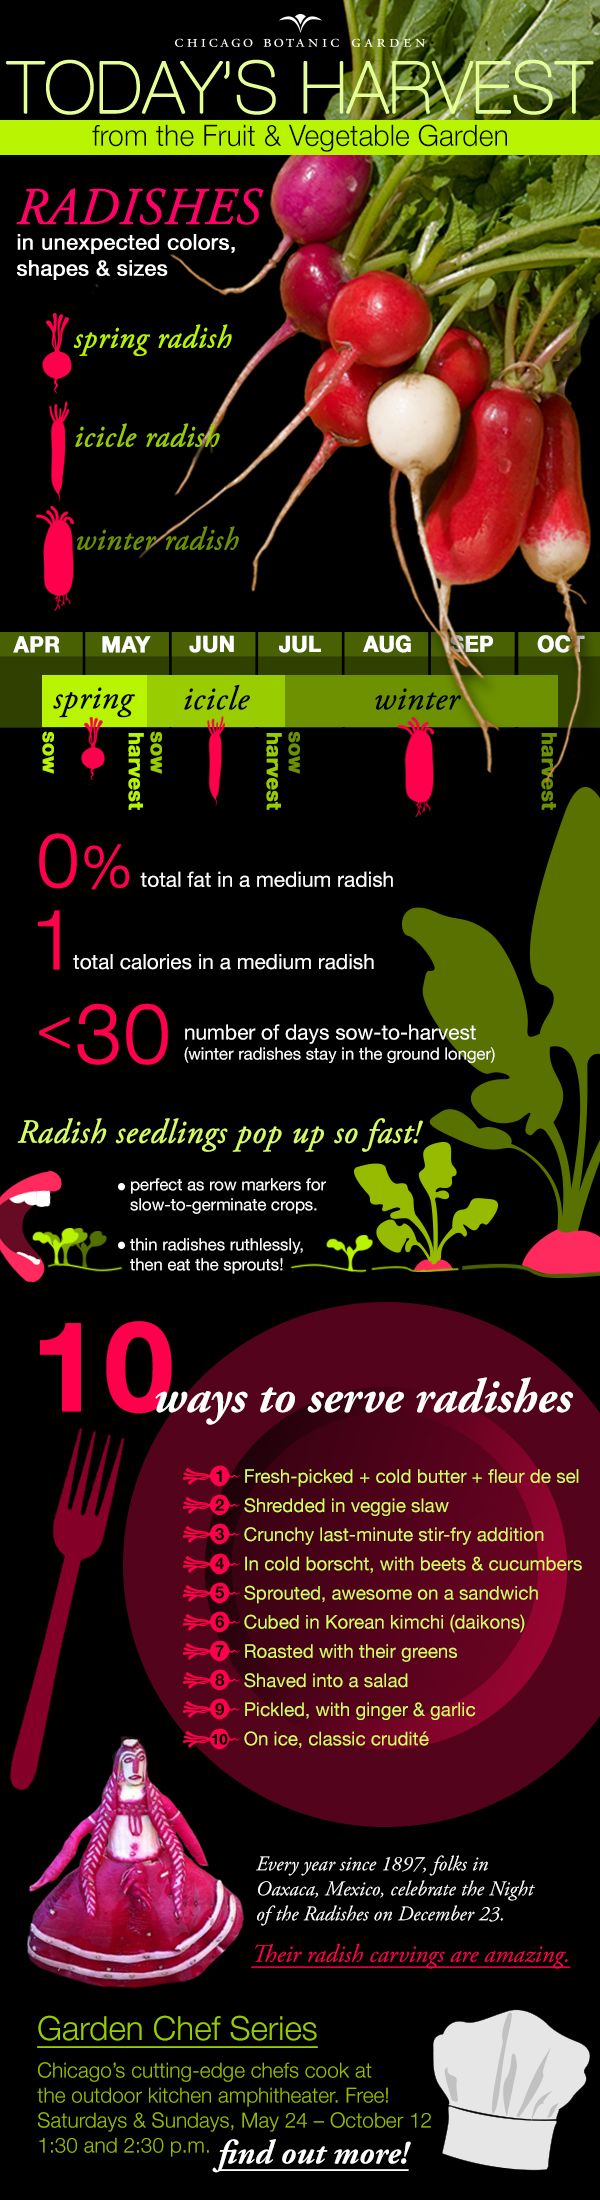 DIAGRAM: Infographic of radish cultivation, harvest, and dining facts.